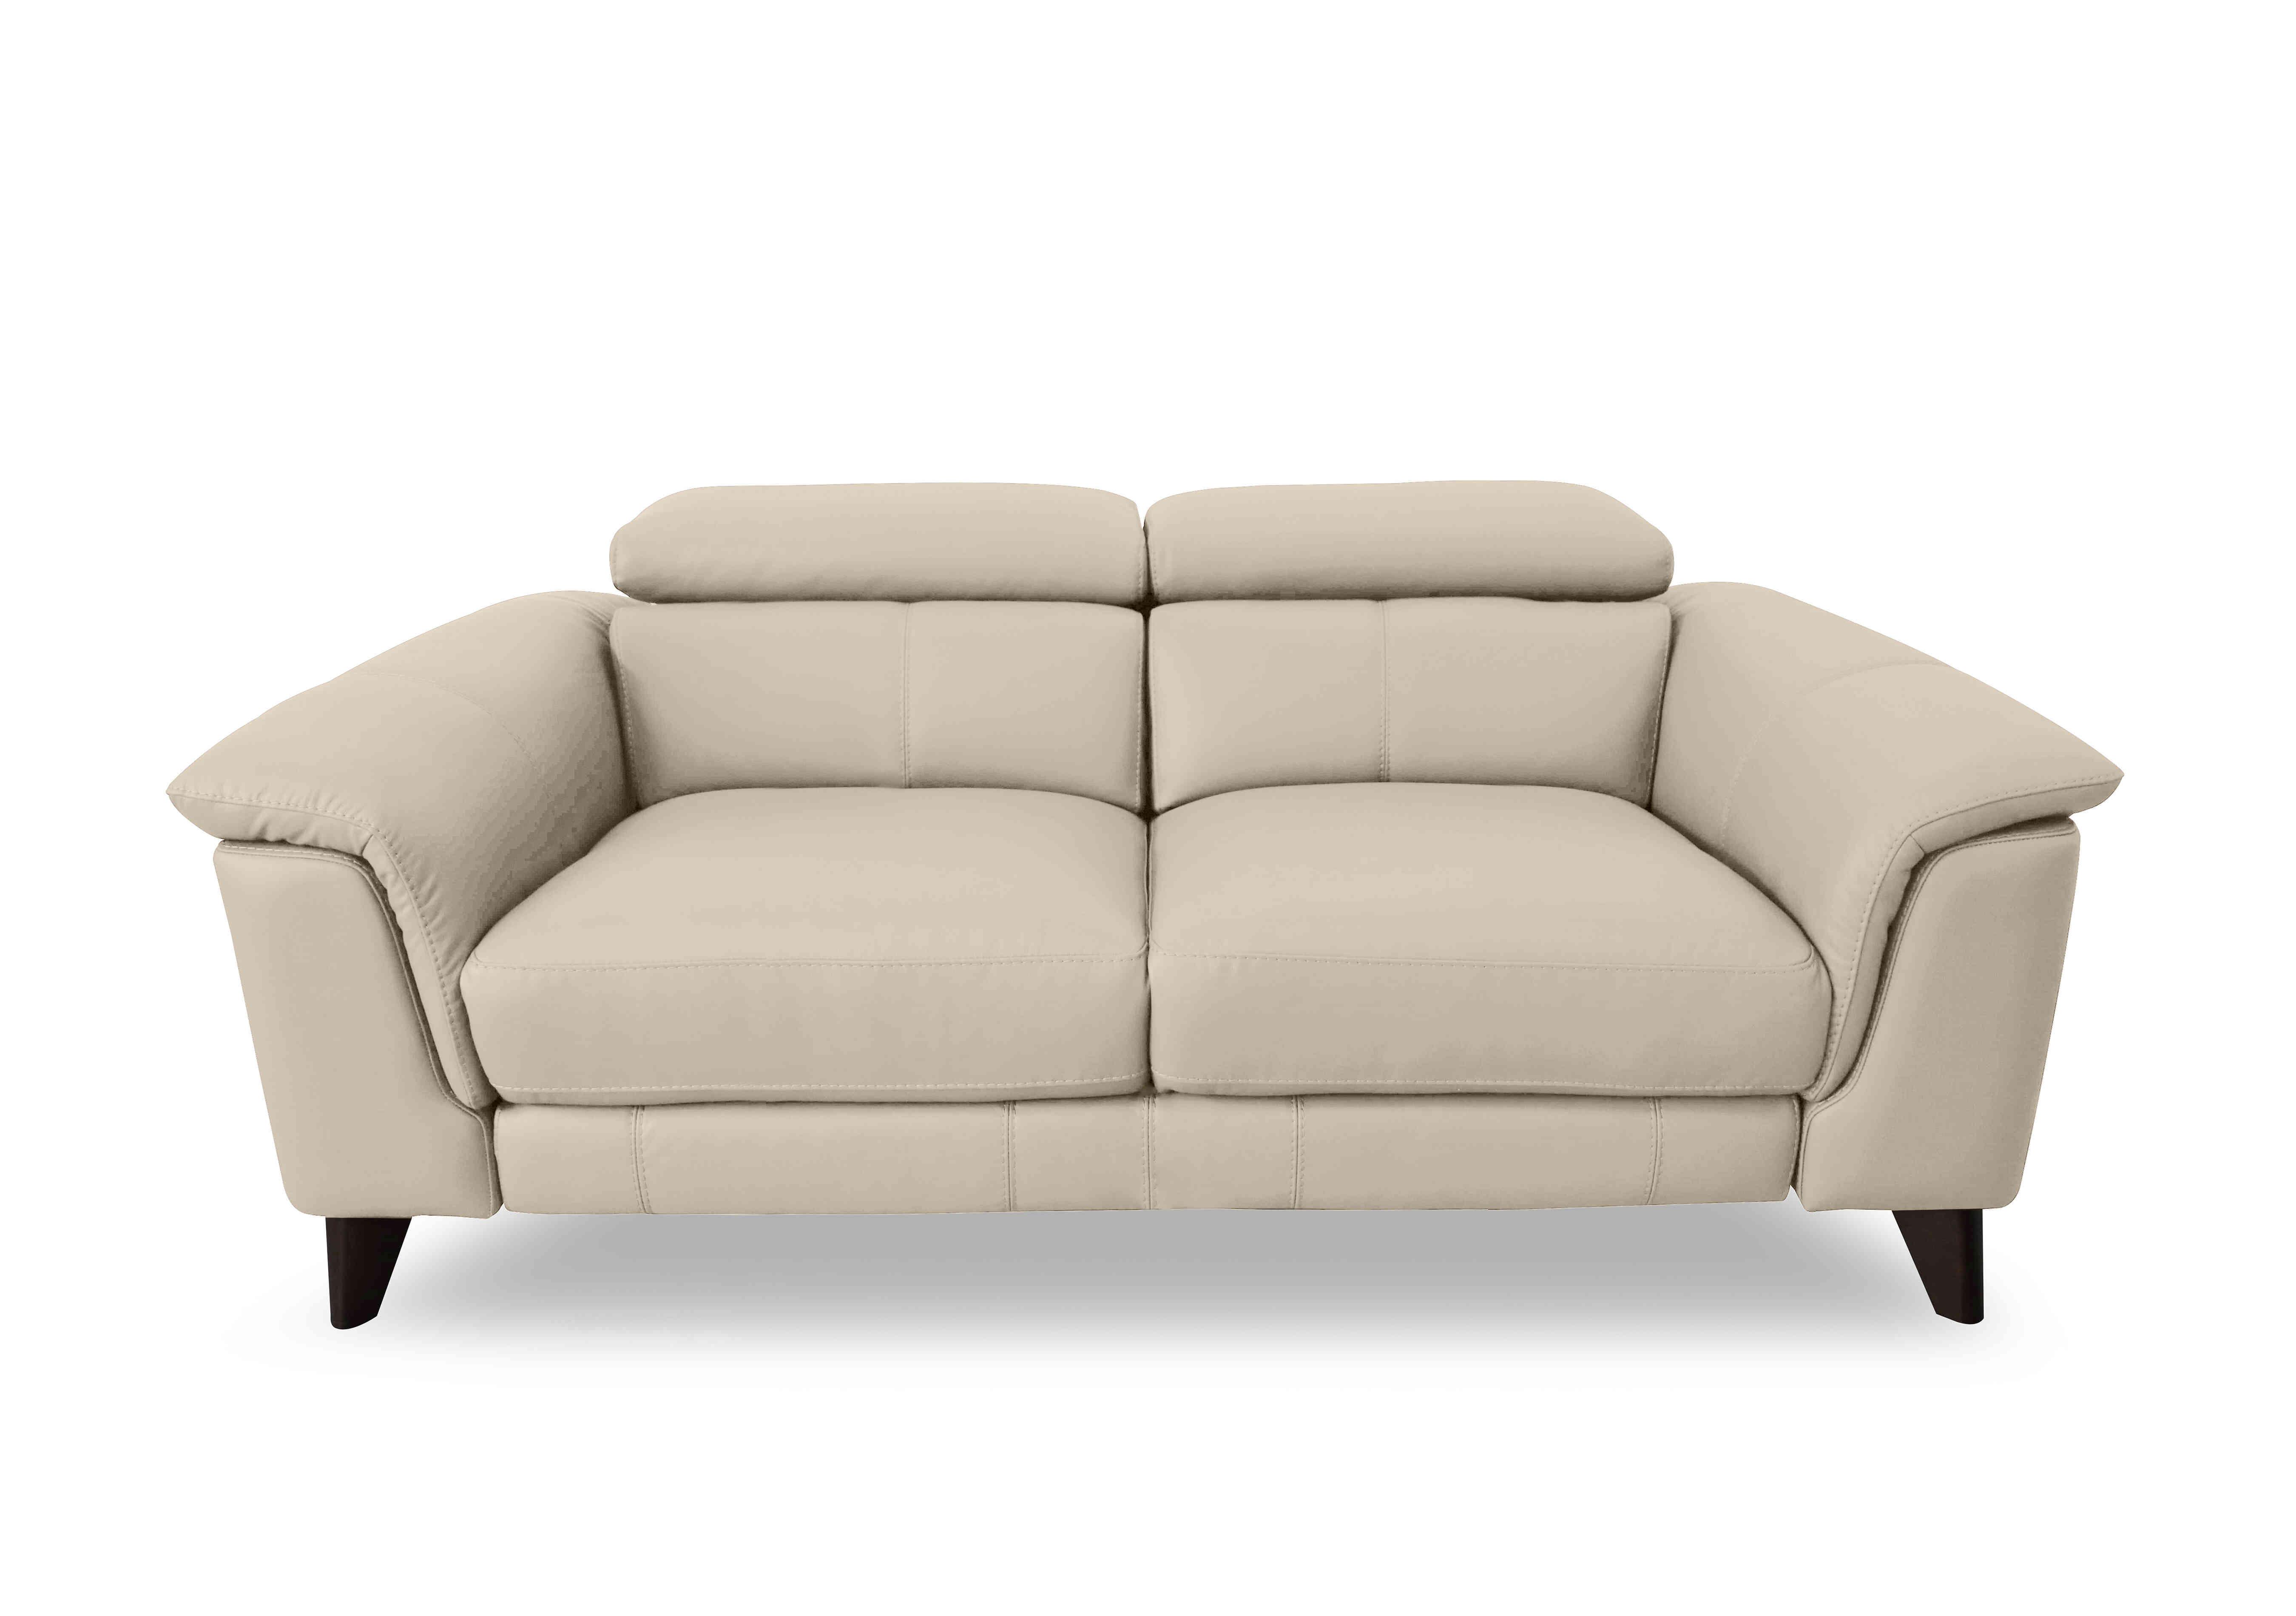 Wade 3 Seater Leather Sofa in Bv-862c Bisque on Furniture Village